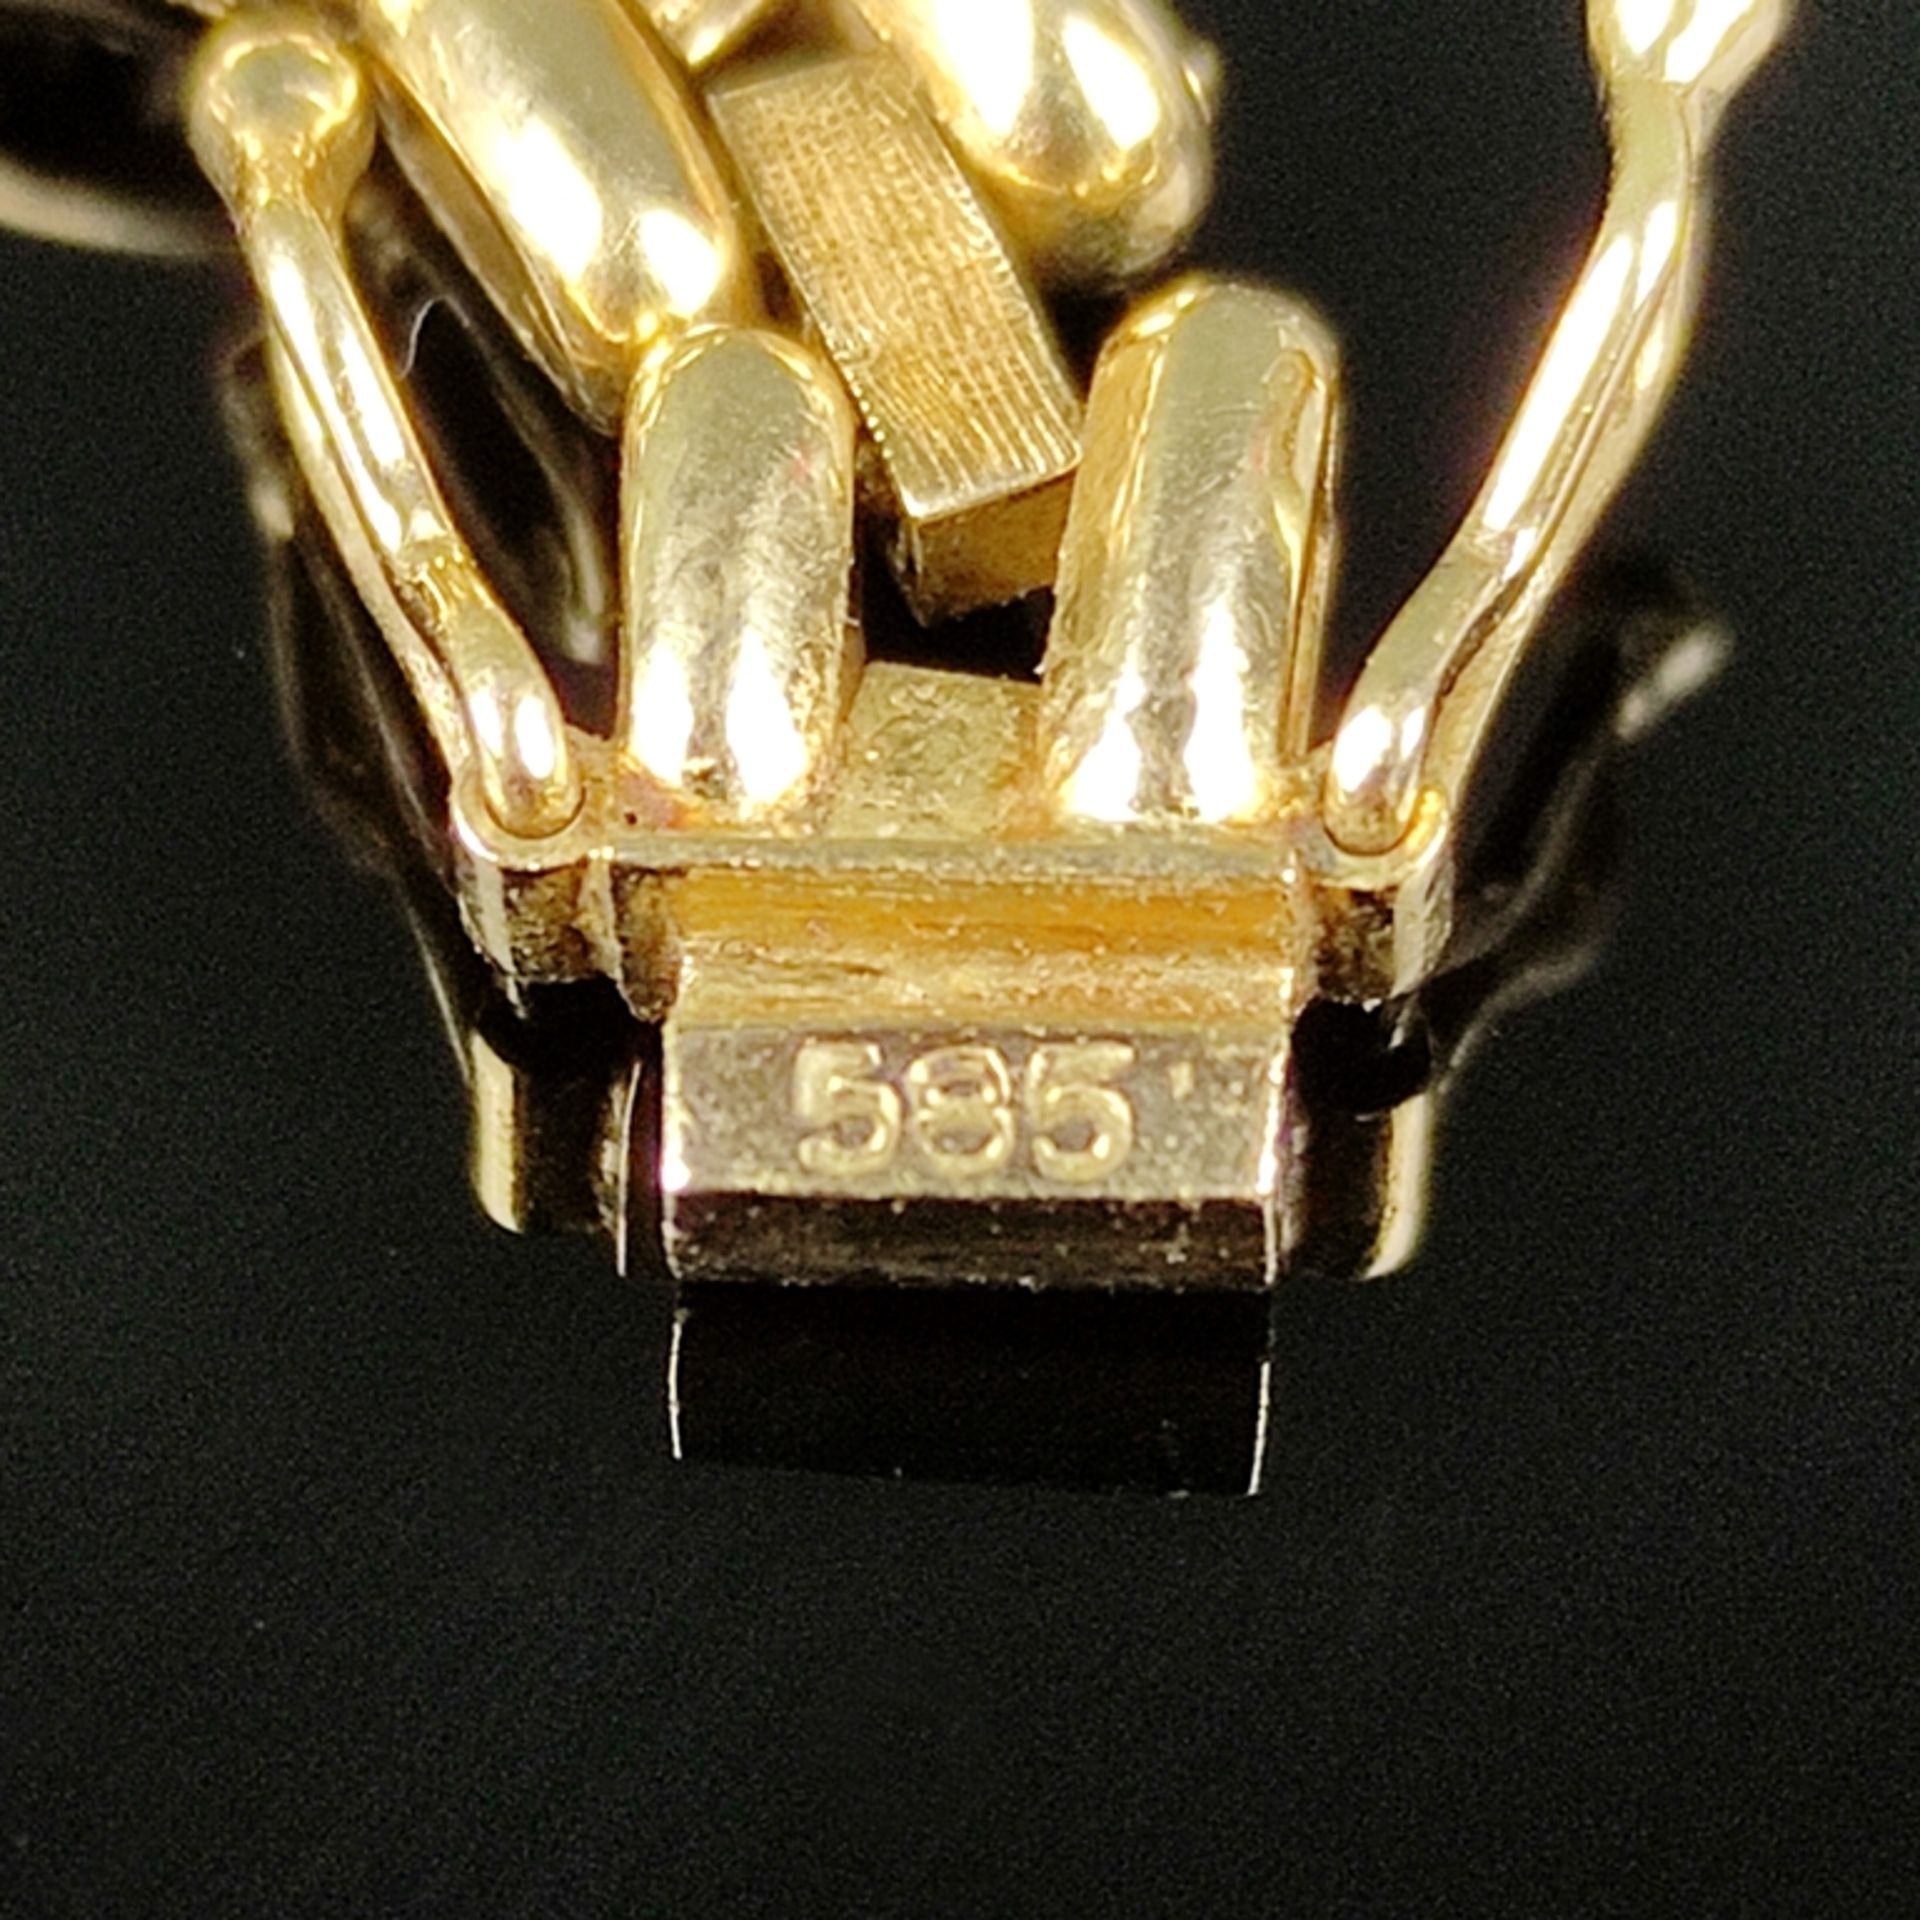 Necklace, 585/14K yellow gold (hallmarked), 37,8g, rectangular flexible links increasing in size to - Image 2 of 2